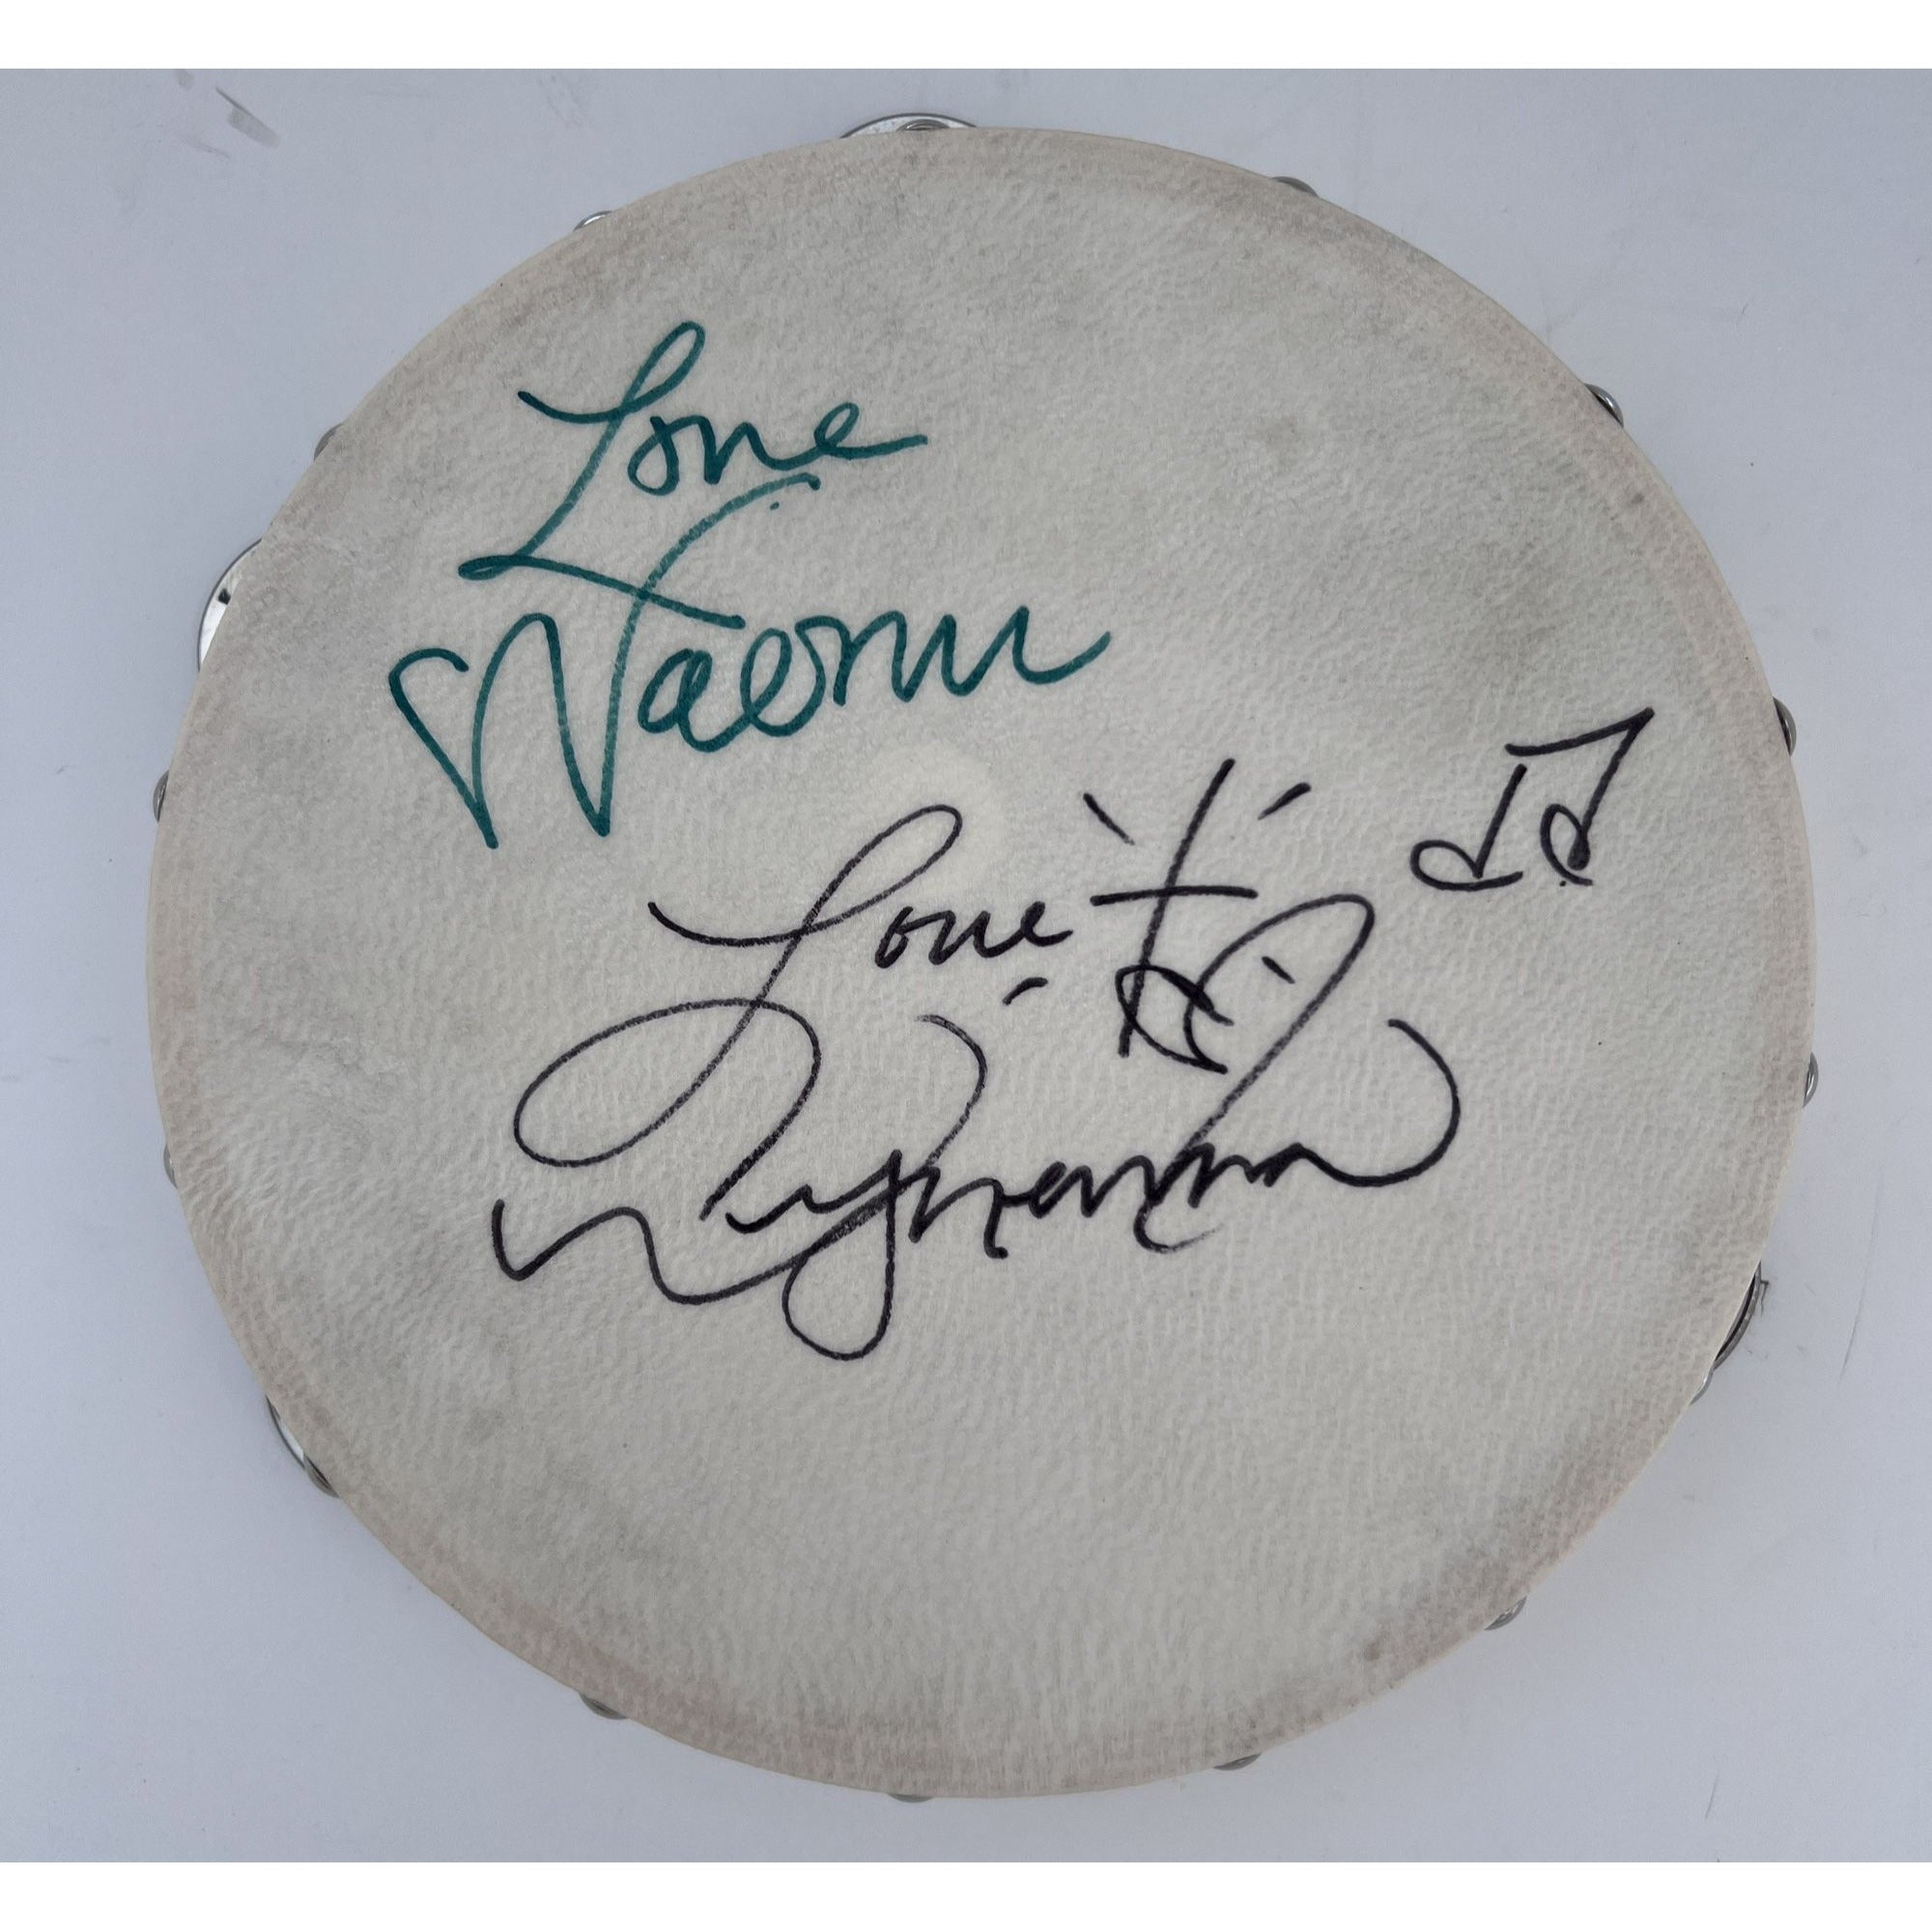 Wynonna and Naomi Judd 10 inch tambourine signed with proof